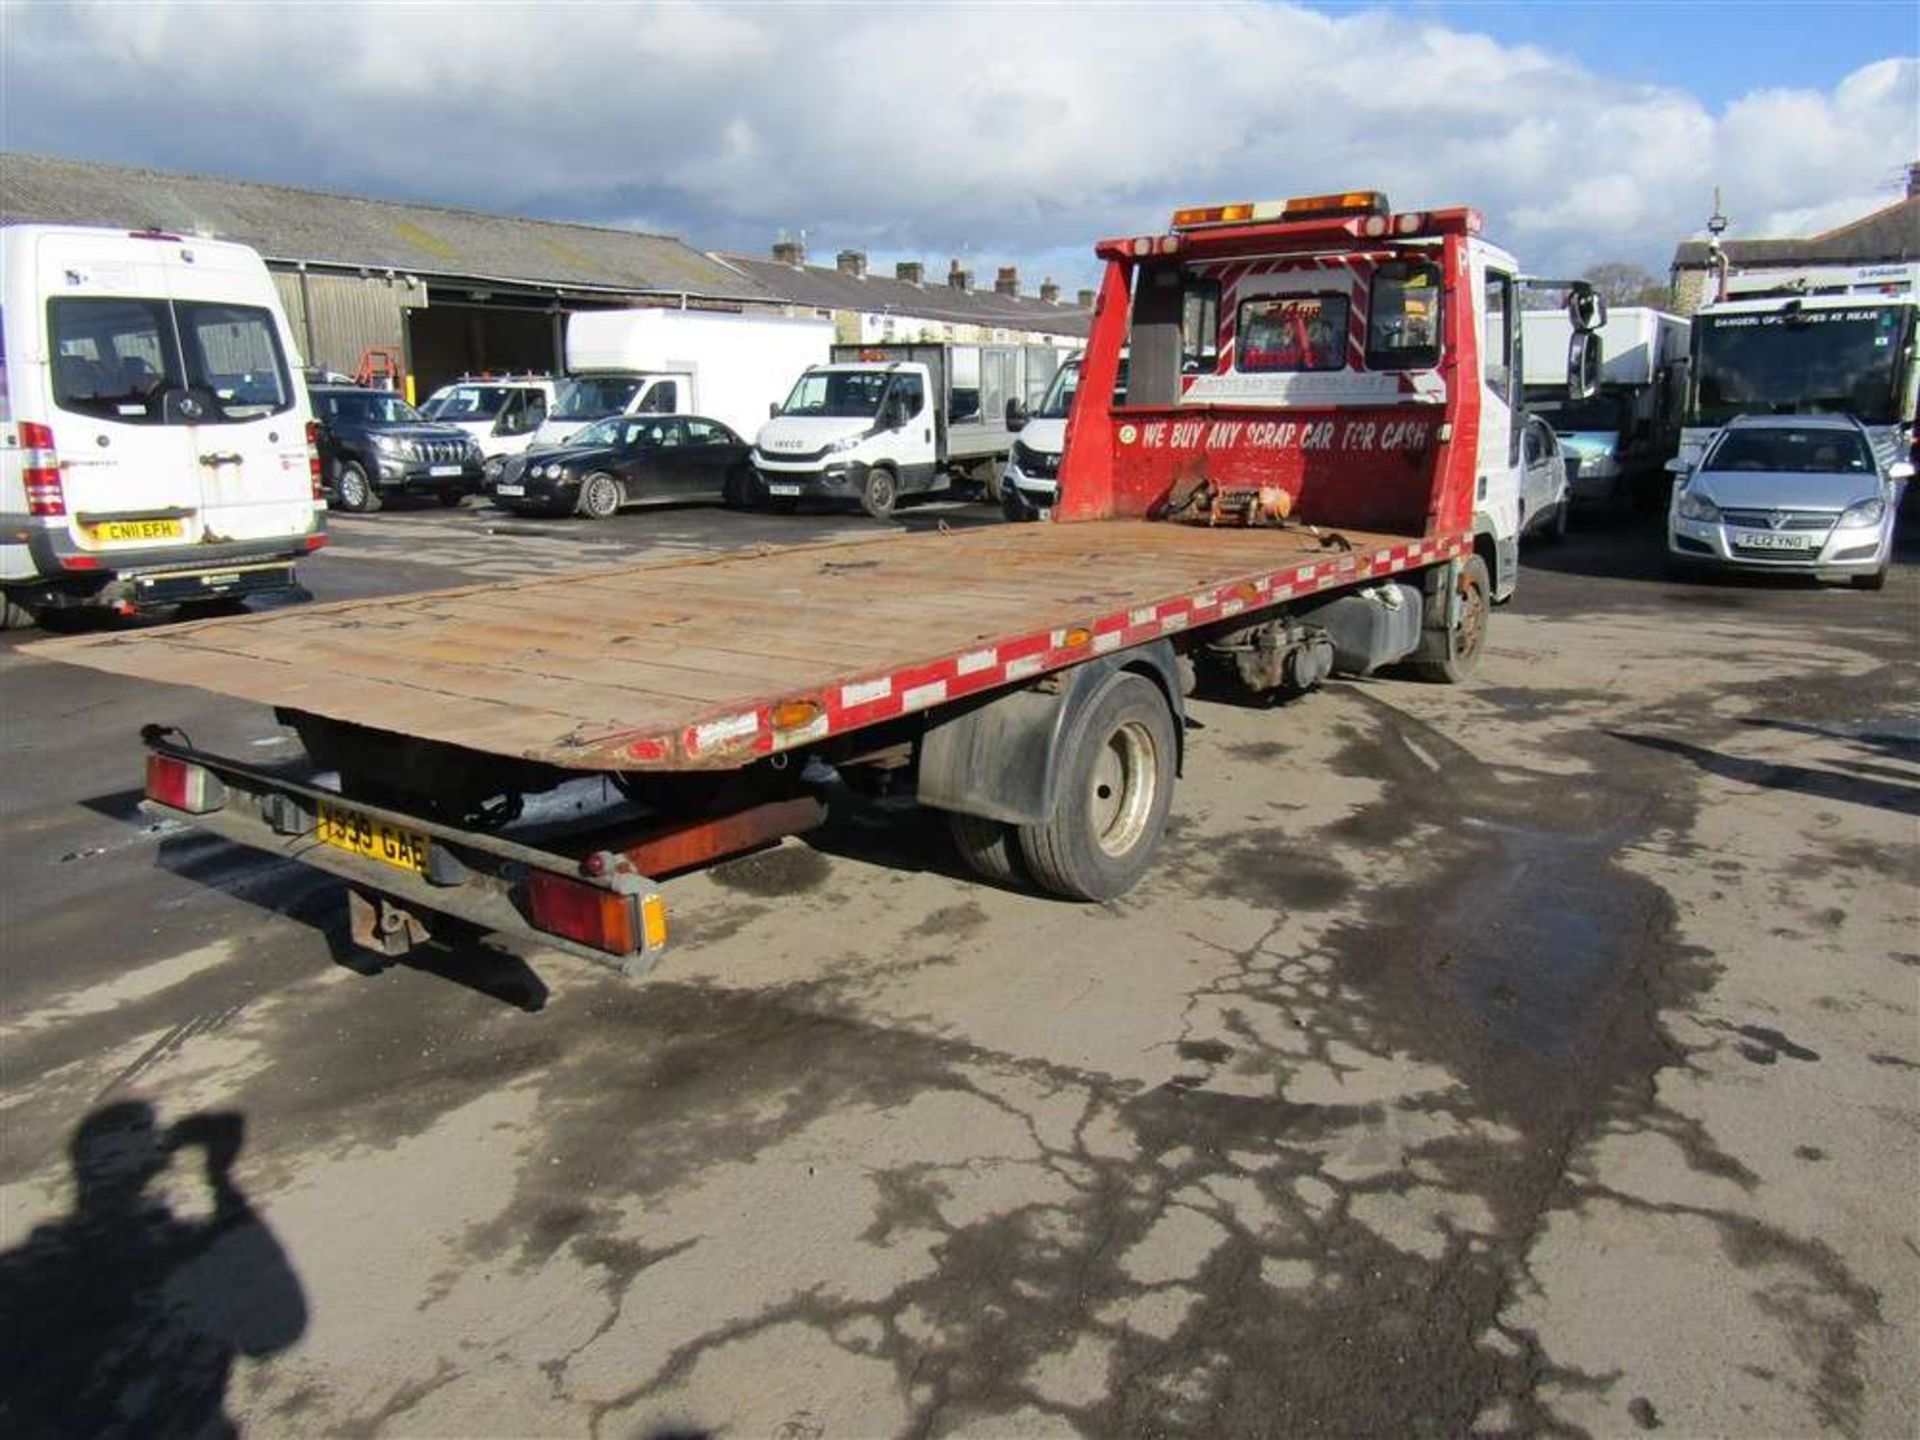 2001 Y reg Iveco Euro Cargo 7.5t Tilt / Slide Recovery Truck - Image 4 of 6